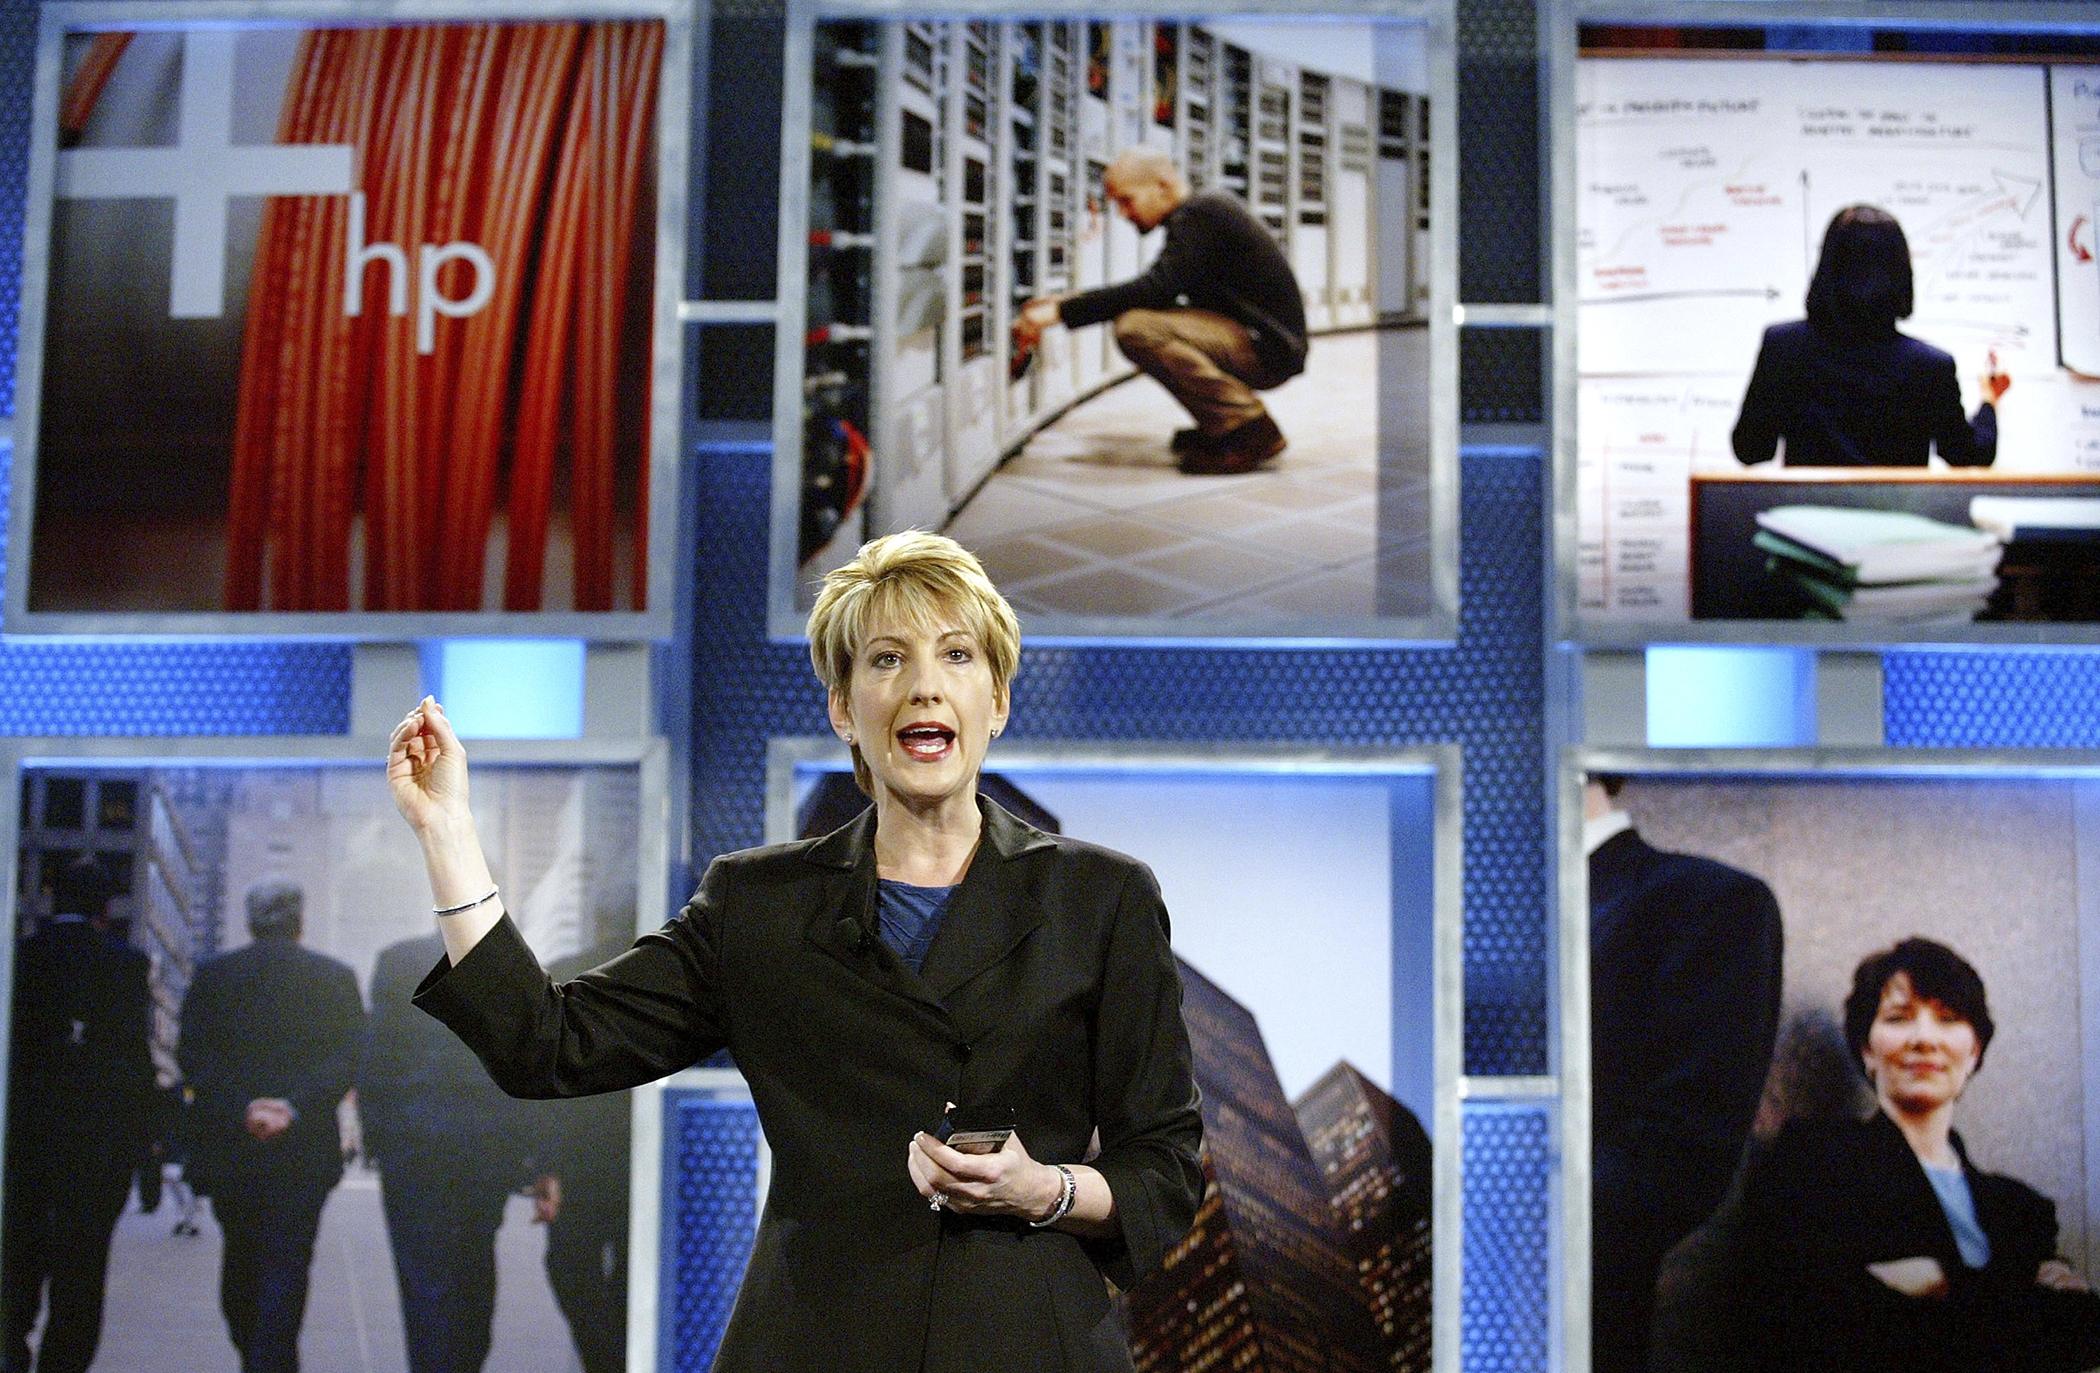 Hewlett-Packard (HP) CEO Carly Fiorina gestures as she speaks at the launch of the HP Adaptive Enterprise Strategy May 6, 2003 in San Jose, California. HP announced new products and services for companies to make their computing systems more adaptive to the changing computer world.